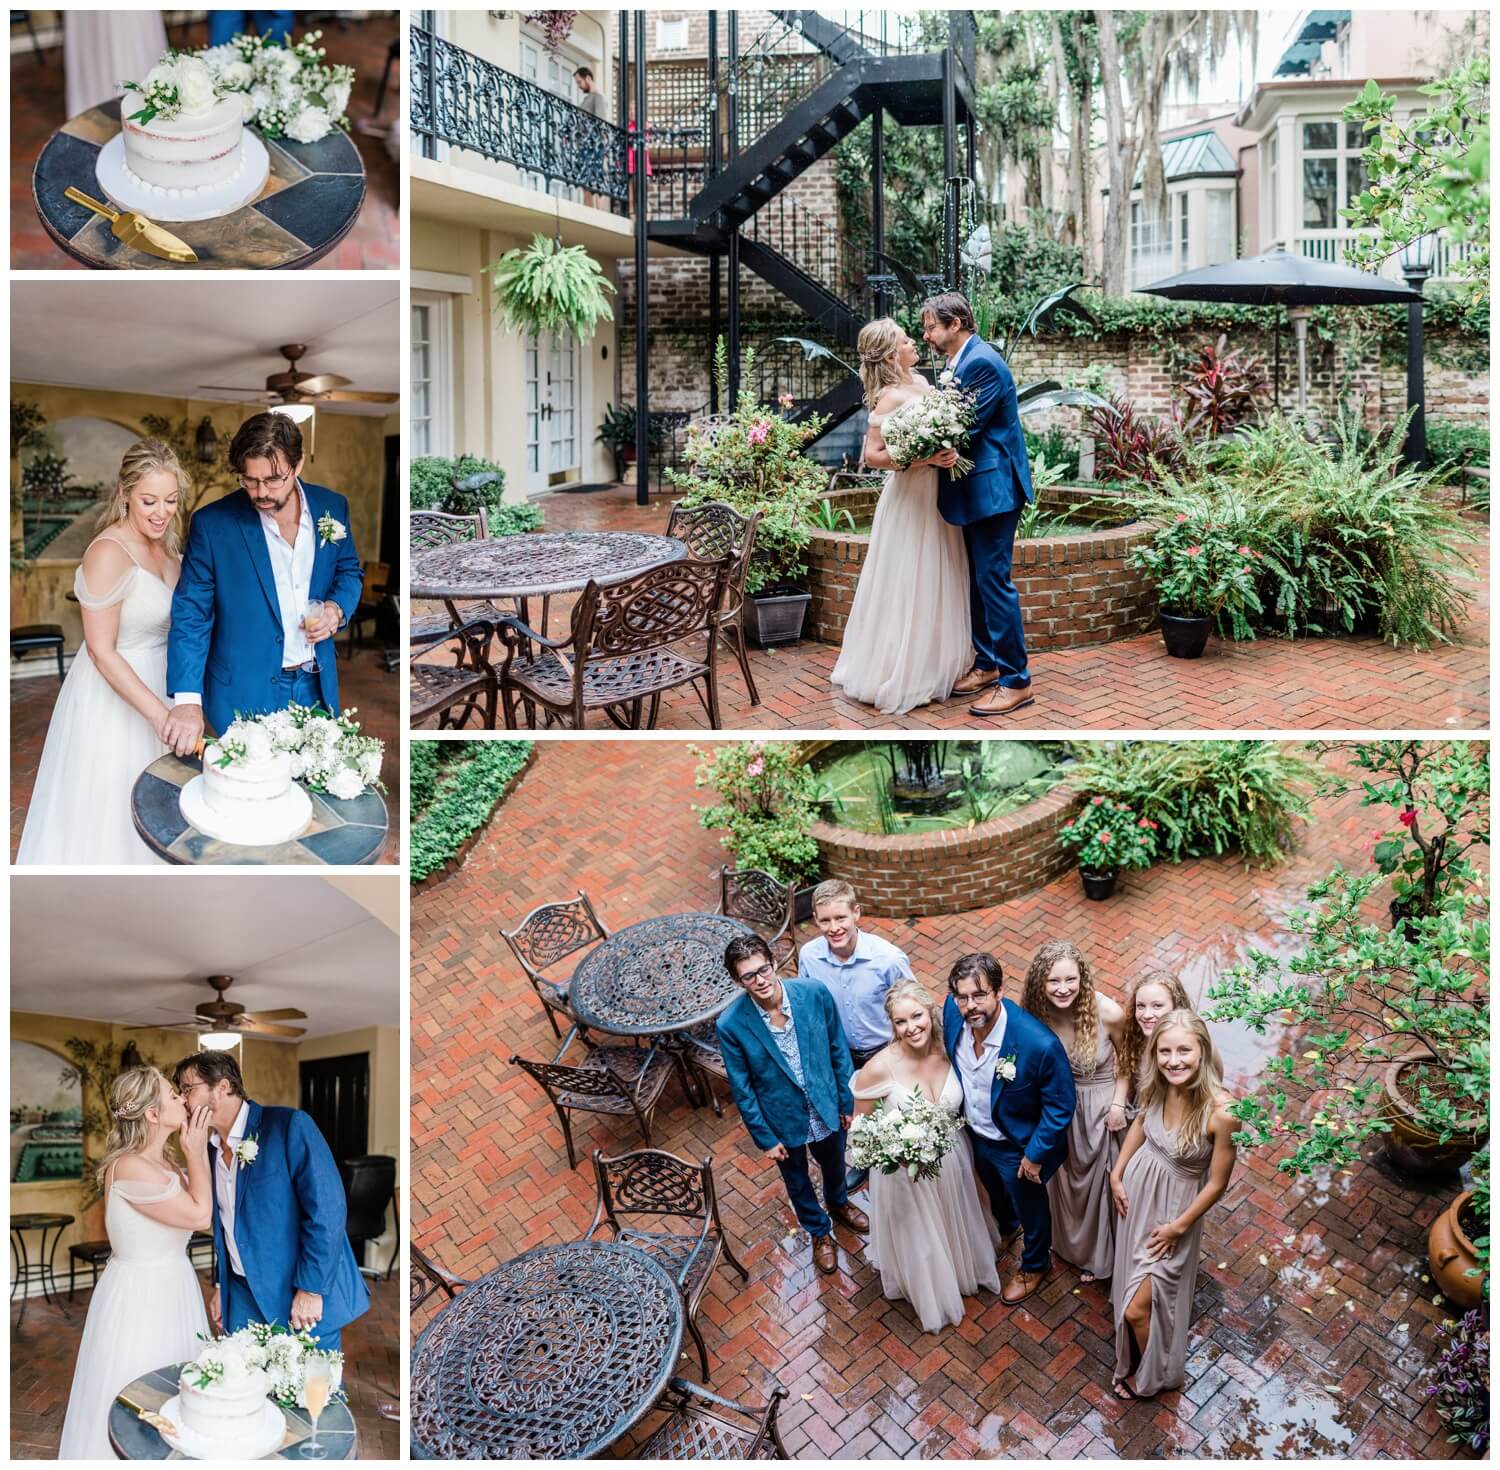 Reception with cake cutting - Savannah Elopement Package